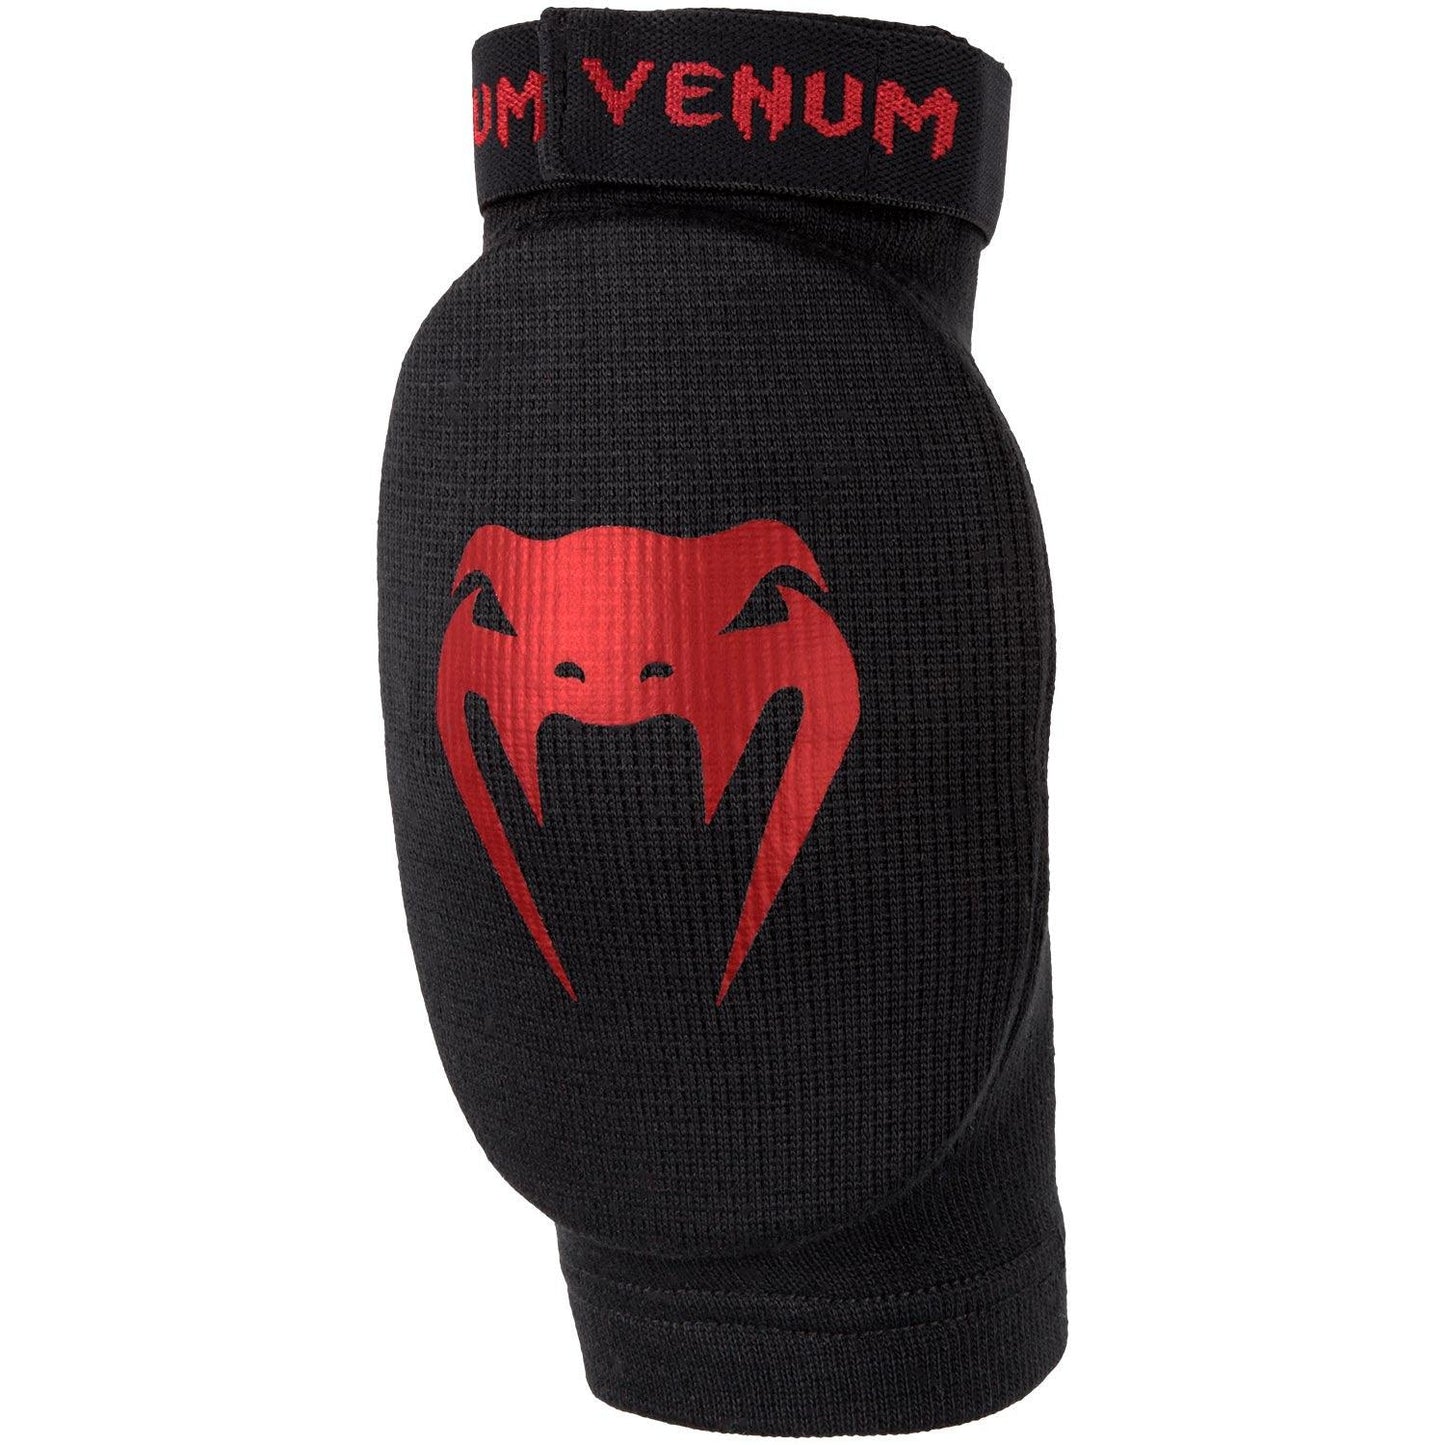 Venum Kontact Elbow Pads - Black/Red Picture 1